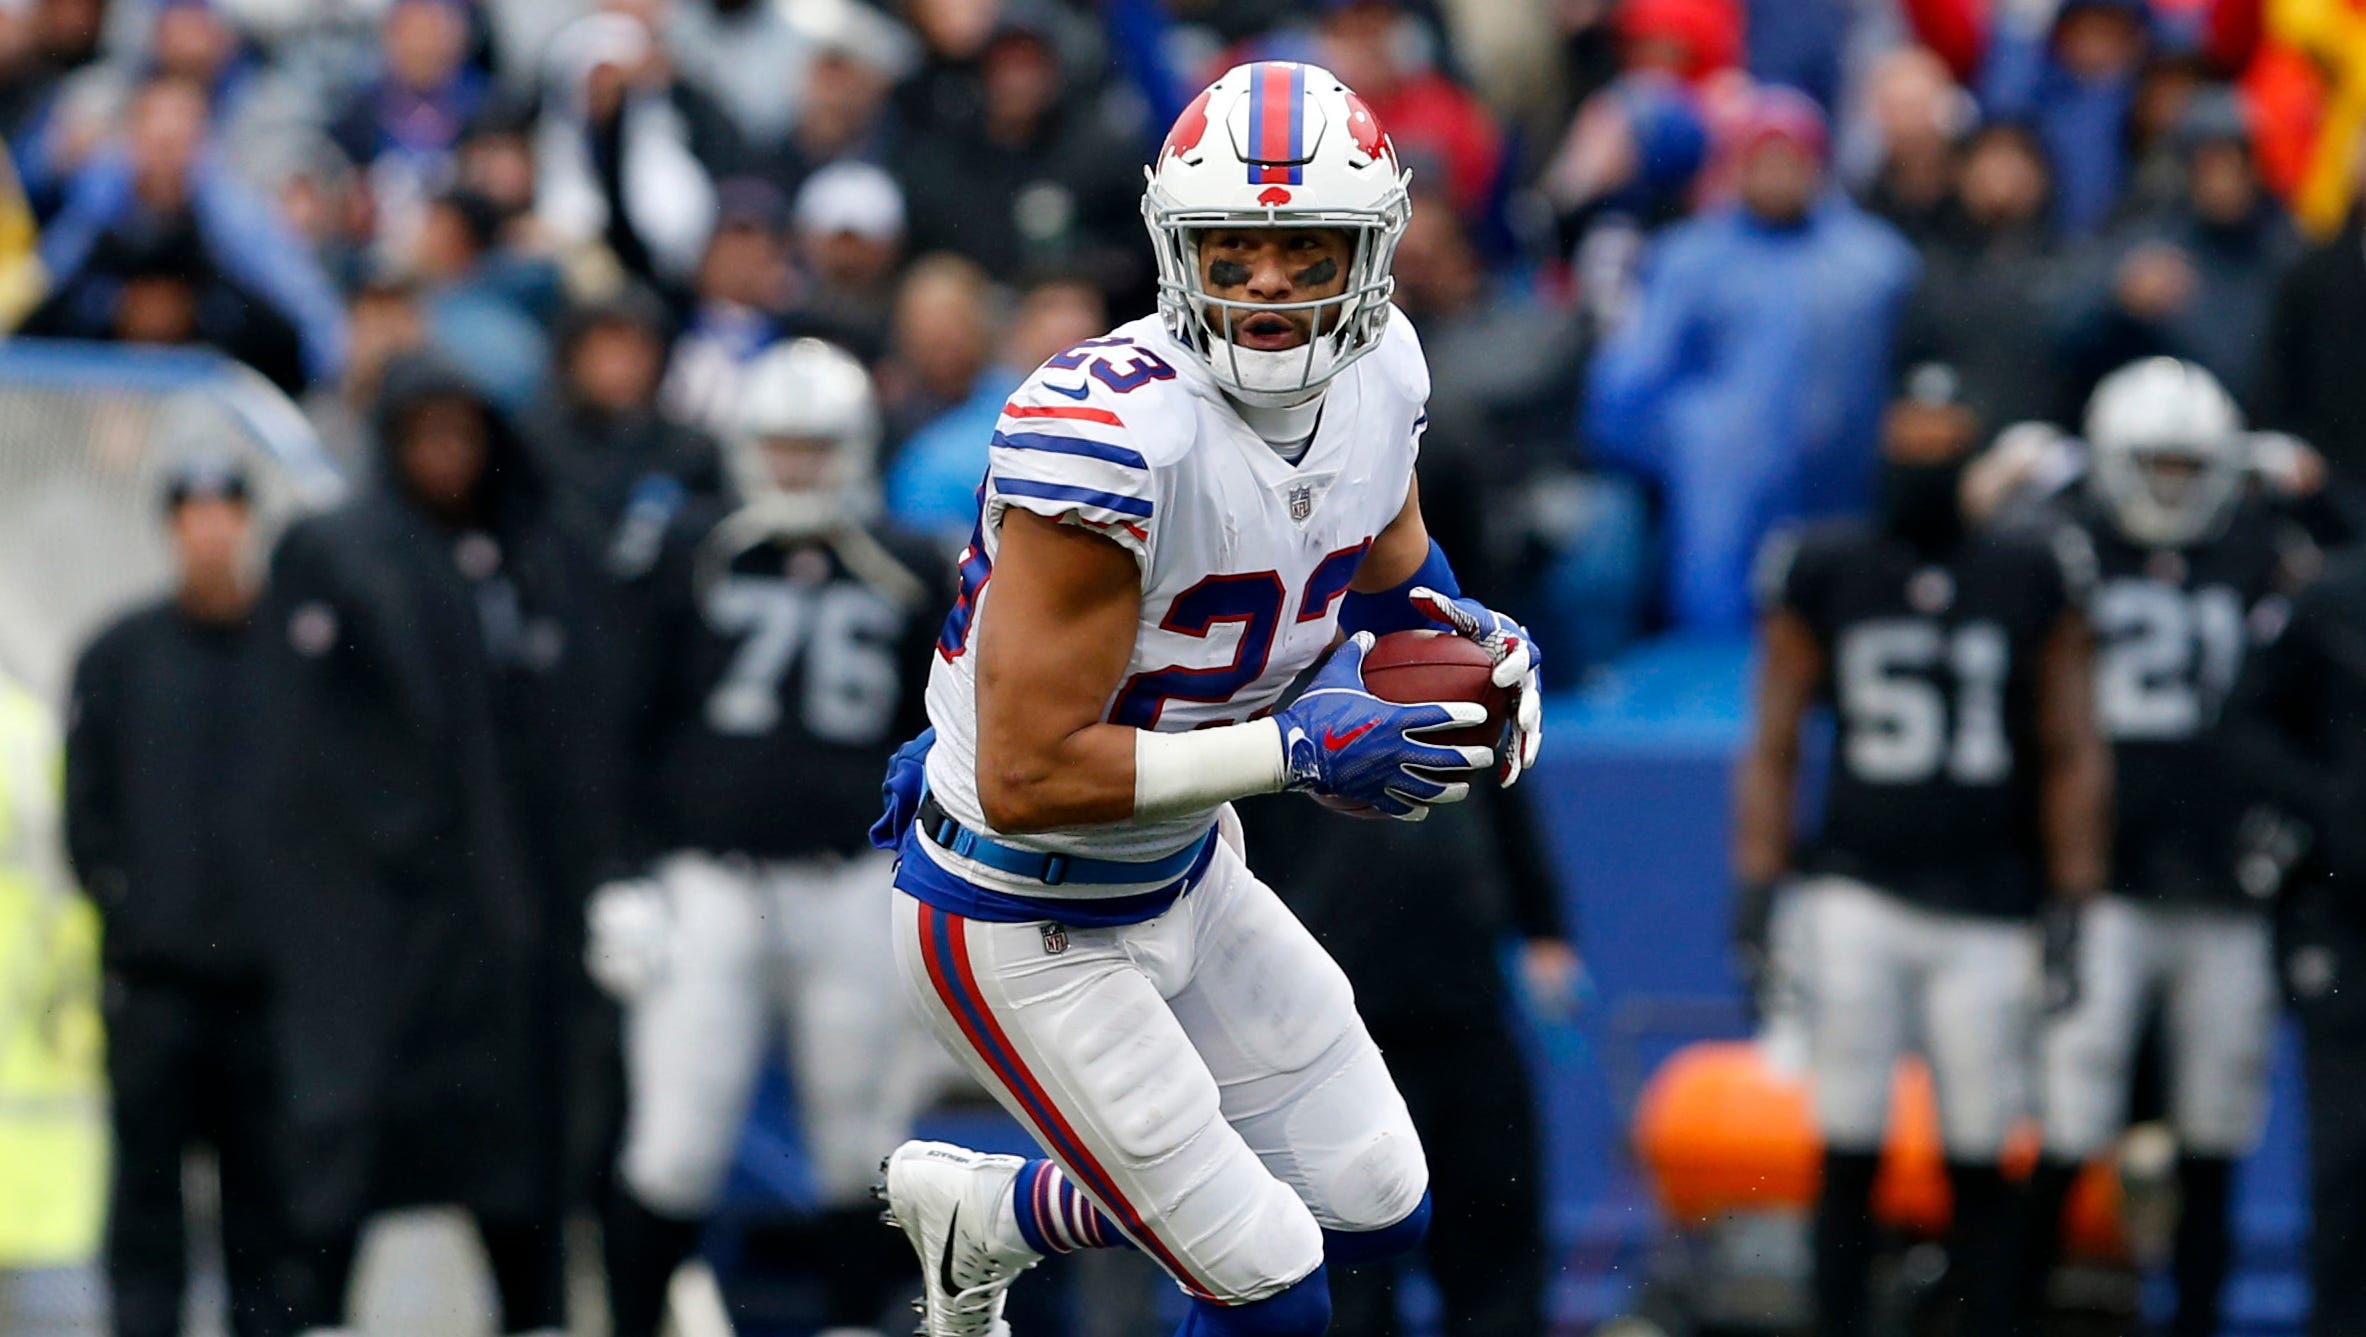 Buffalo Bills safety Micah Hyde (23) runs back a interception during the second half against the Oakland Raiders at New Era Field.